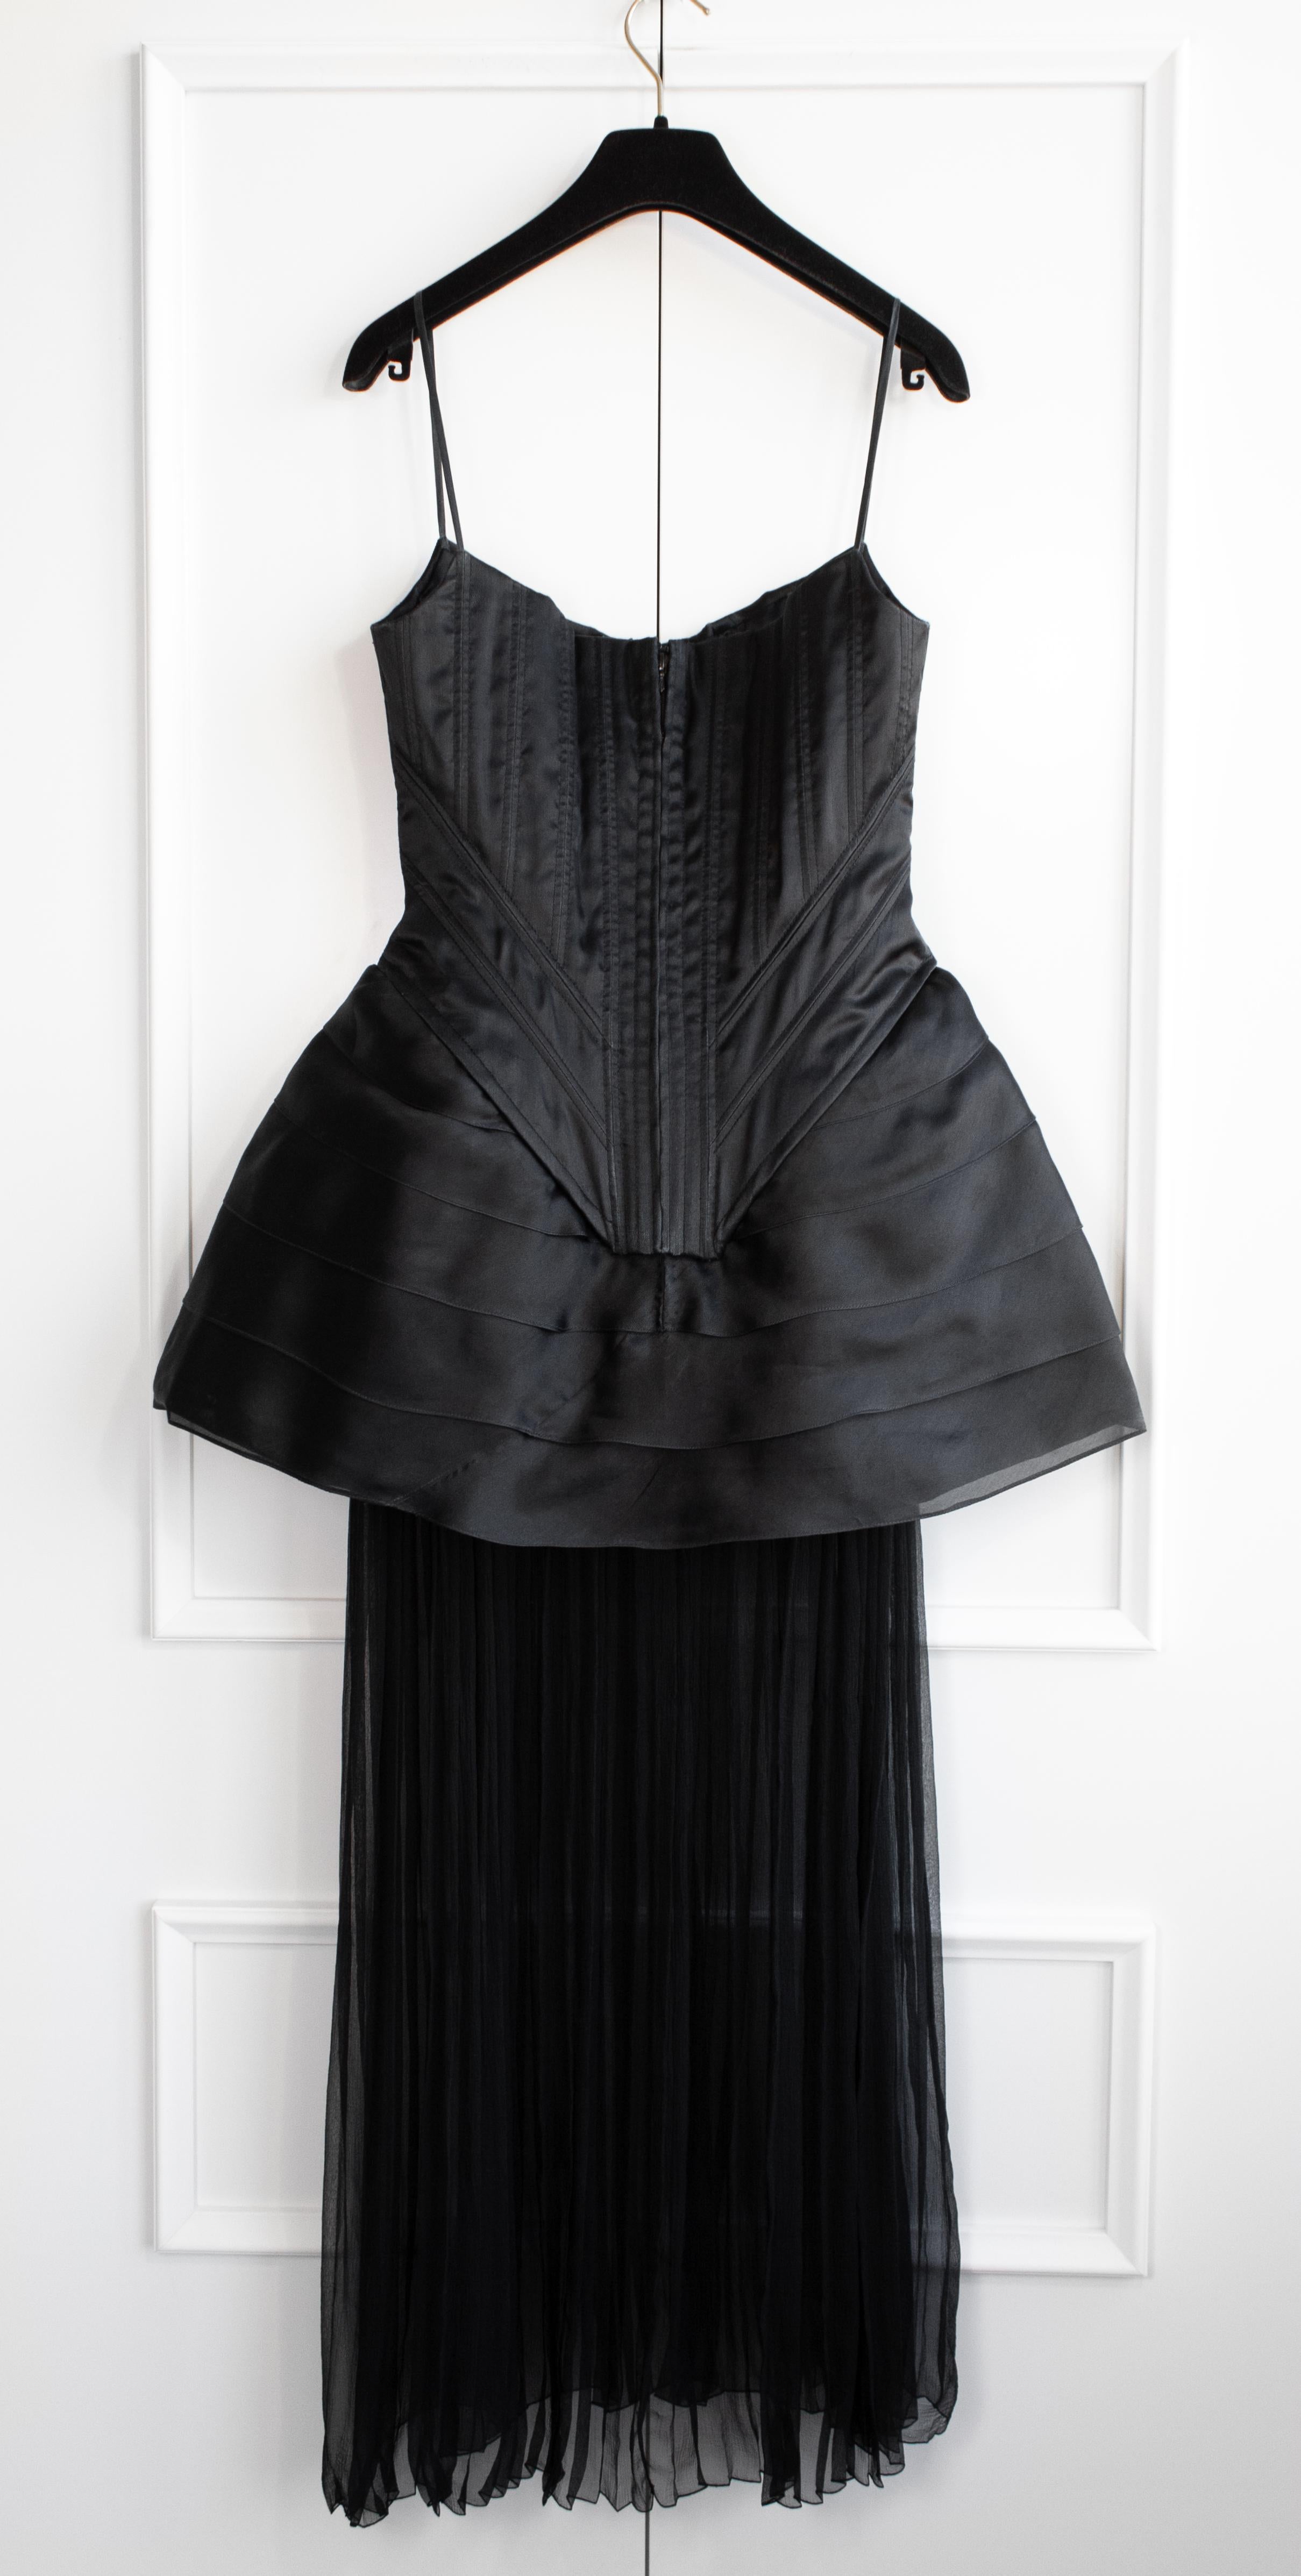 Chanel Vintage Haute Couture Fall/Winter 1992 Black Satin Corset Gown Dress For Sale 2